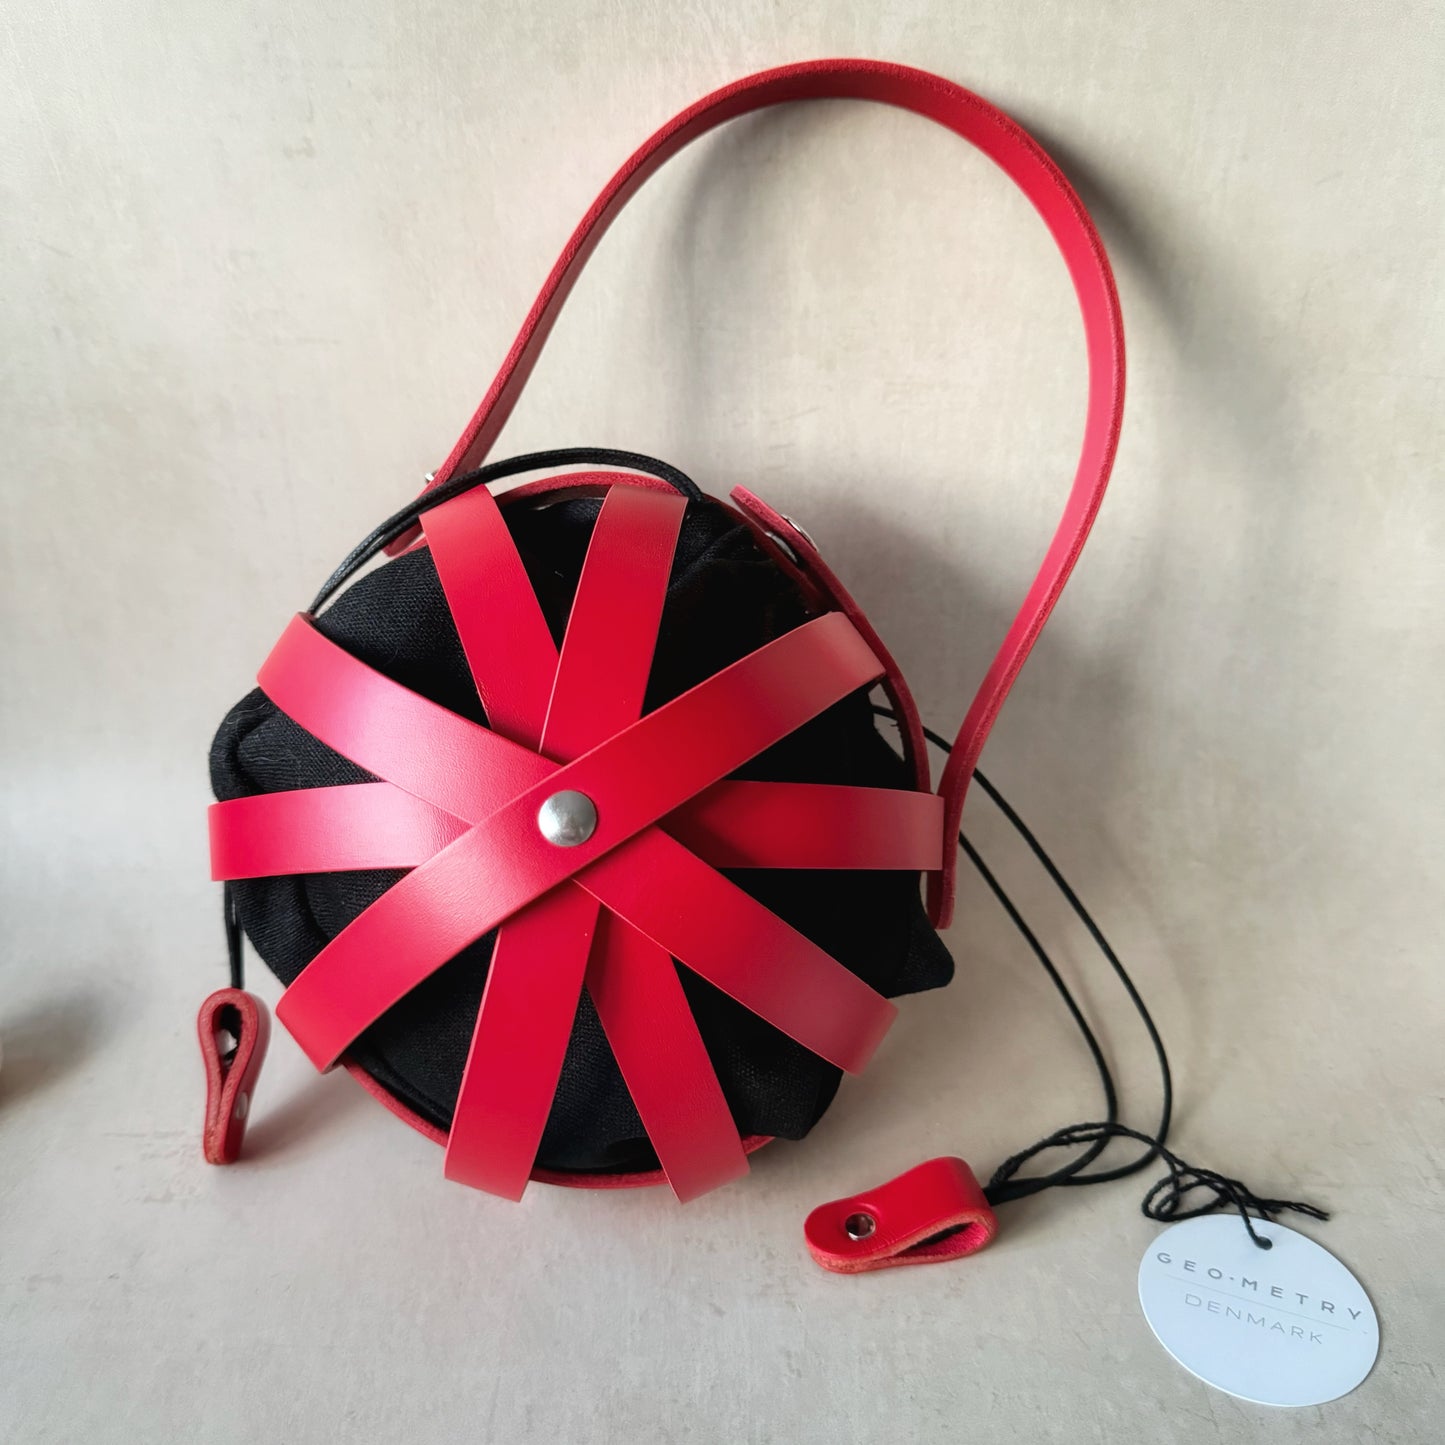 Geo-Metry Inner Bag for Cocoon - Black with Red Leather Tab